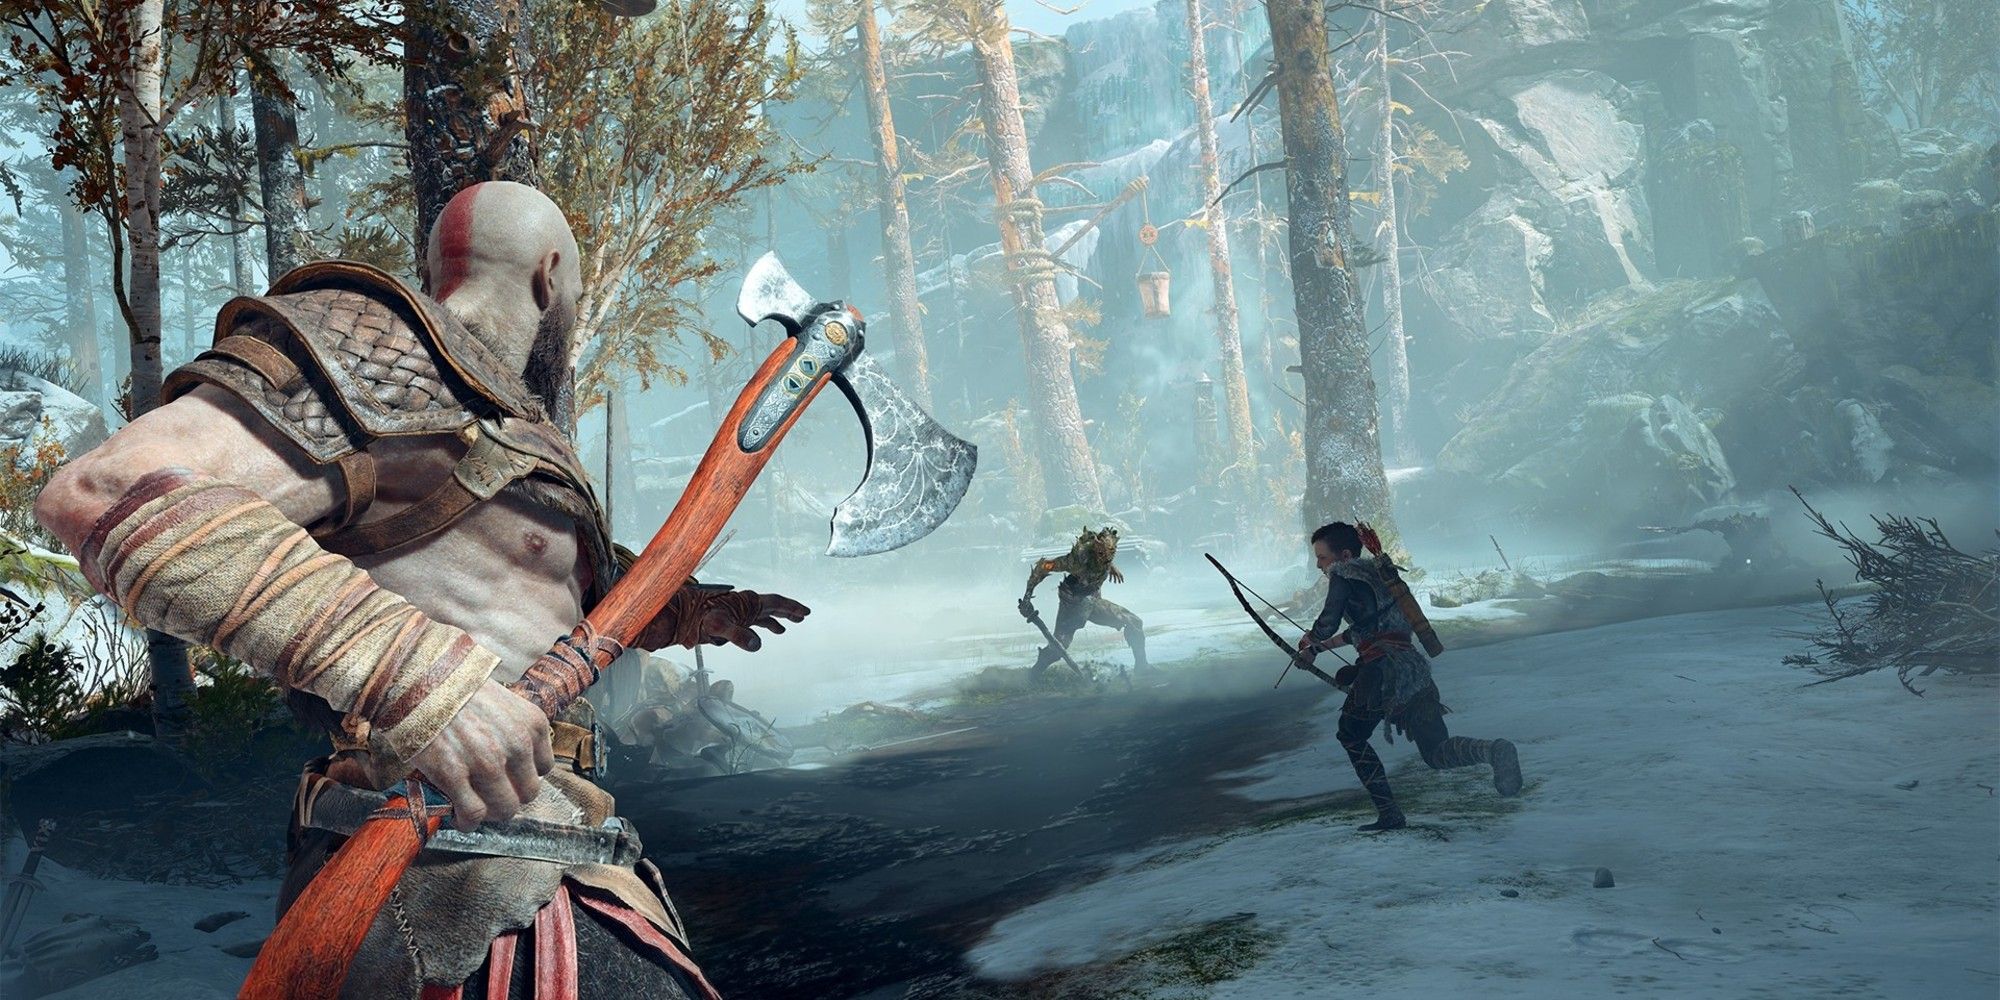 Kratos and Atreus work together to fight a Revenant in the forest in God Of War